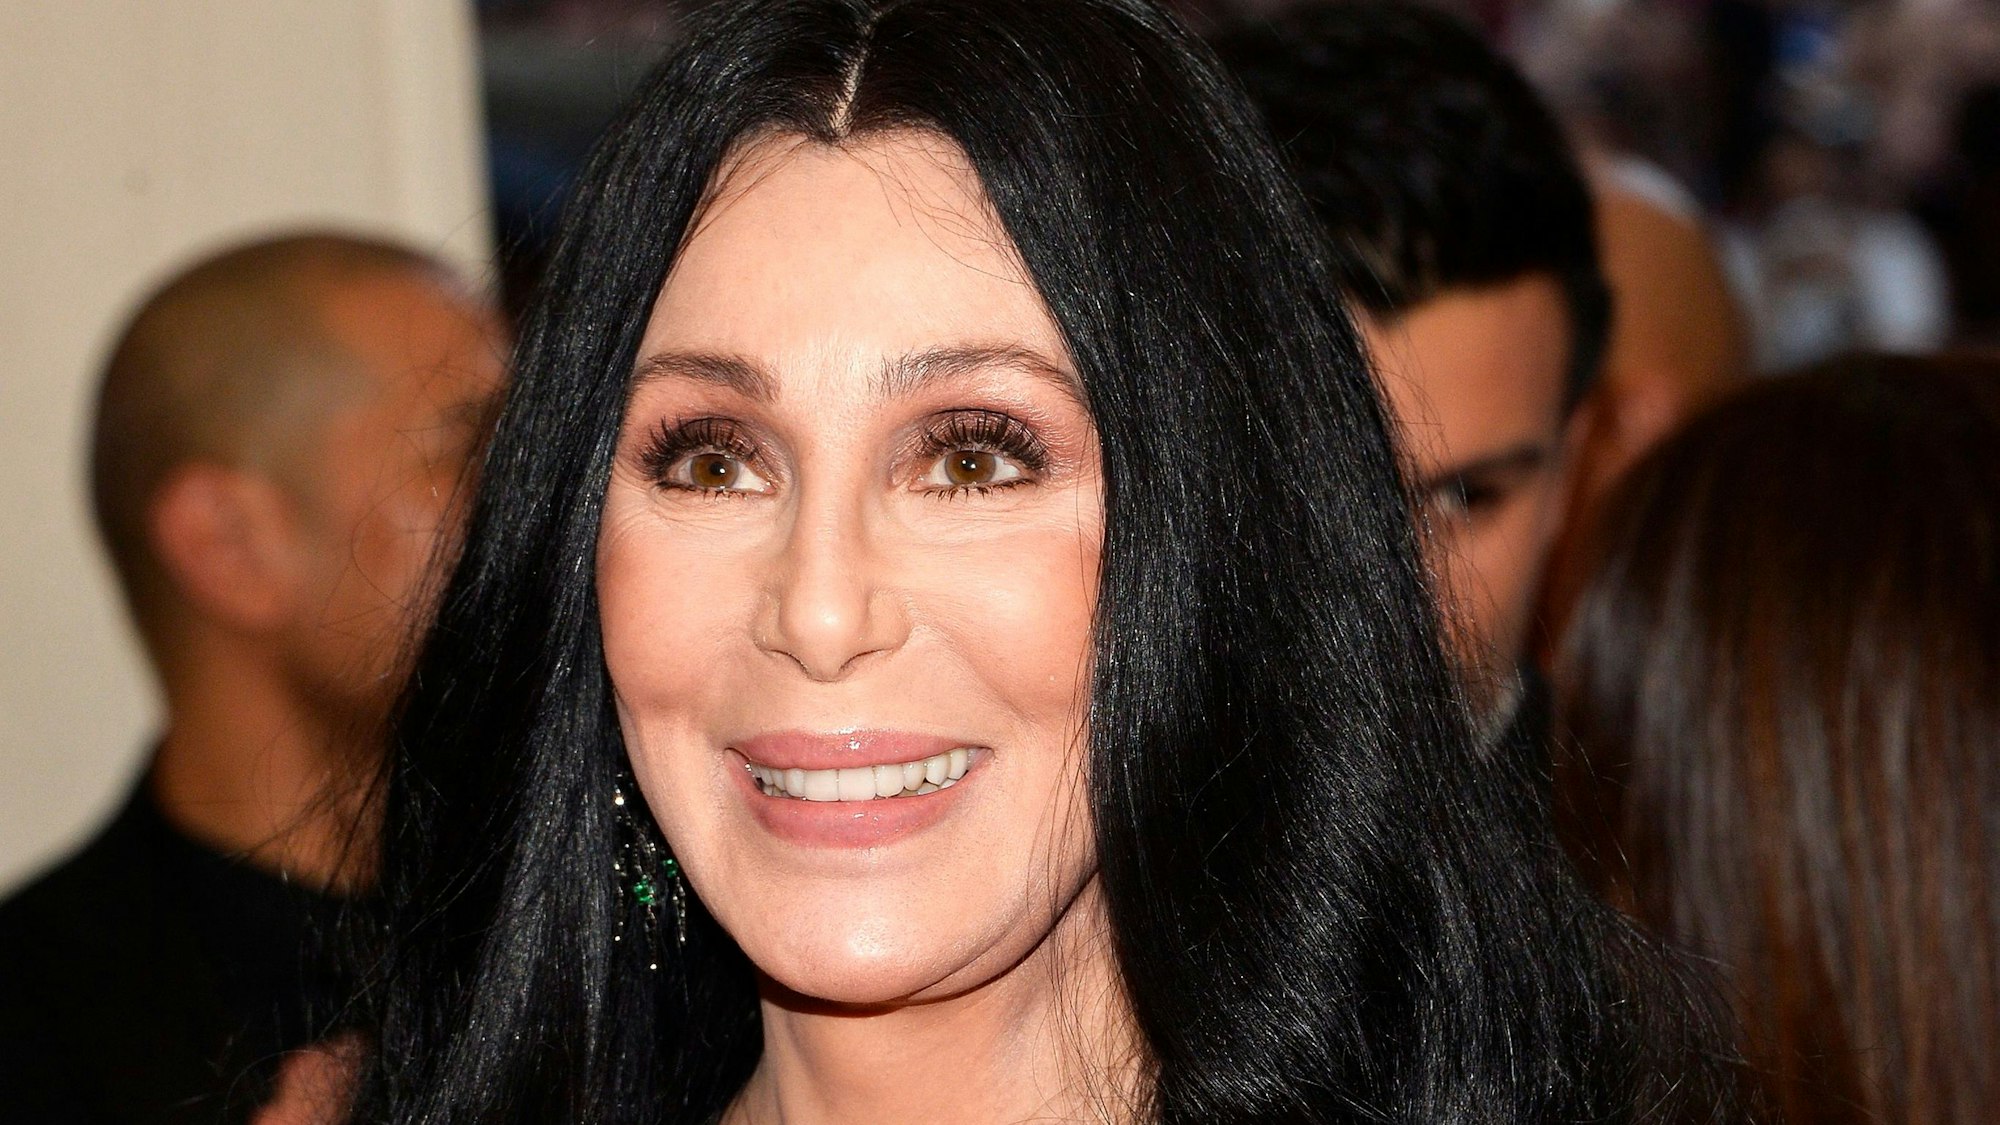 Cher arrives for the 2015 Anna Wintour Costume Center Gala held at the New York Metropolitan Museum of Art in New York.